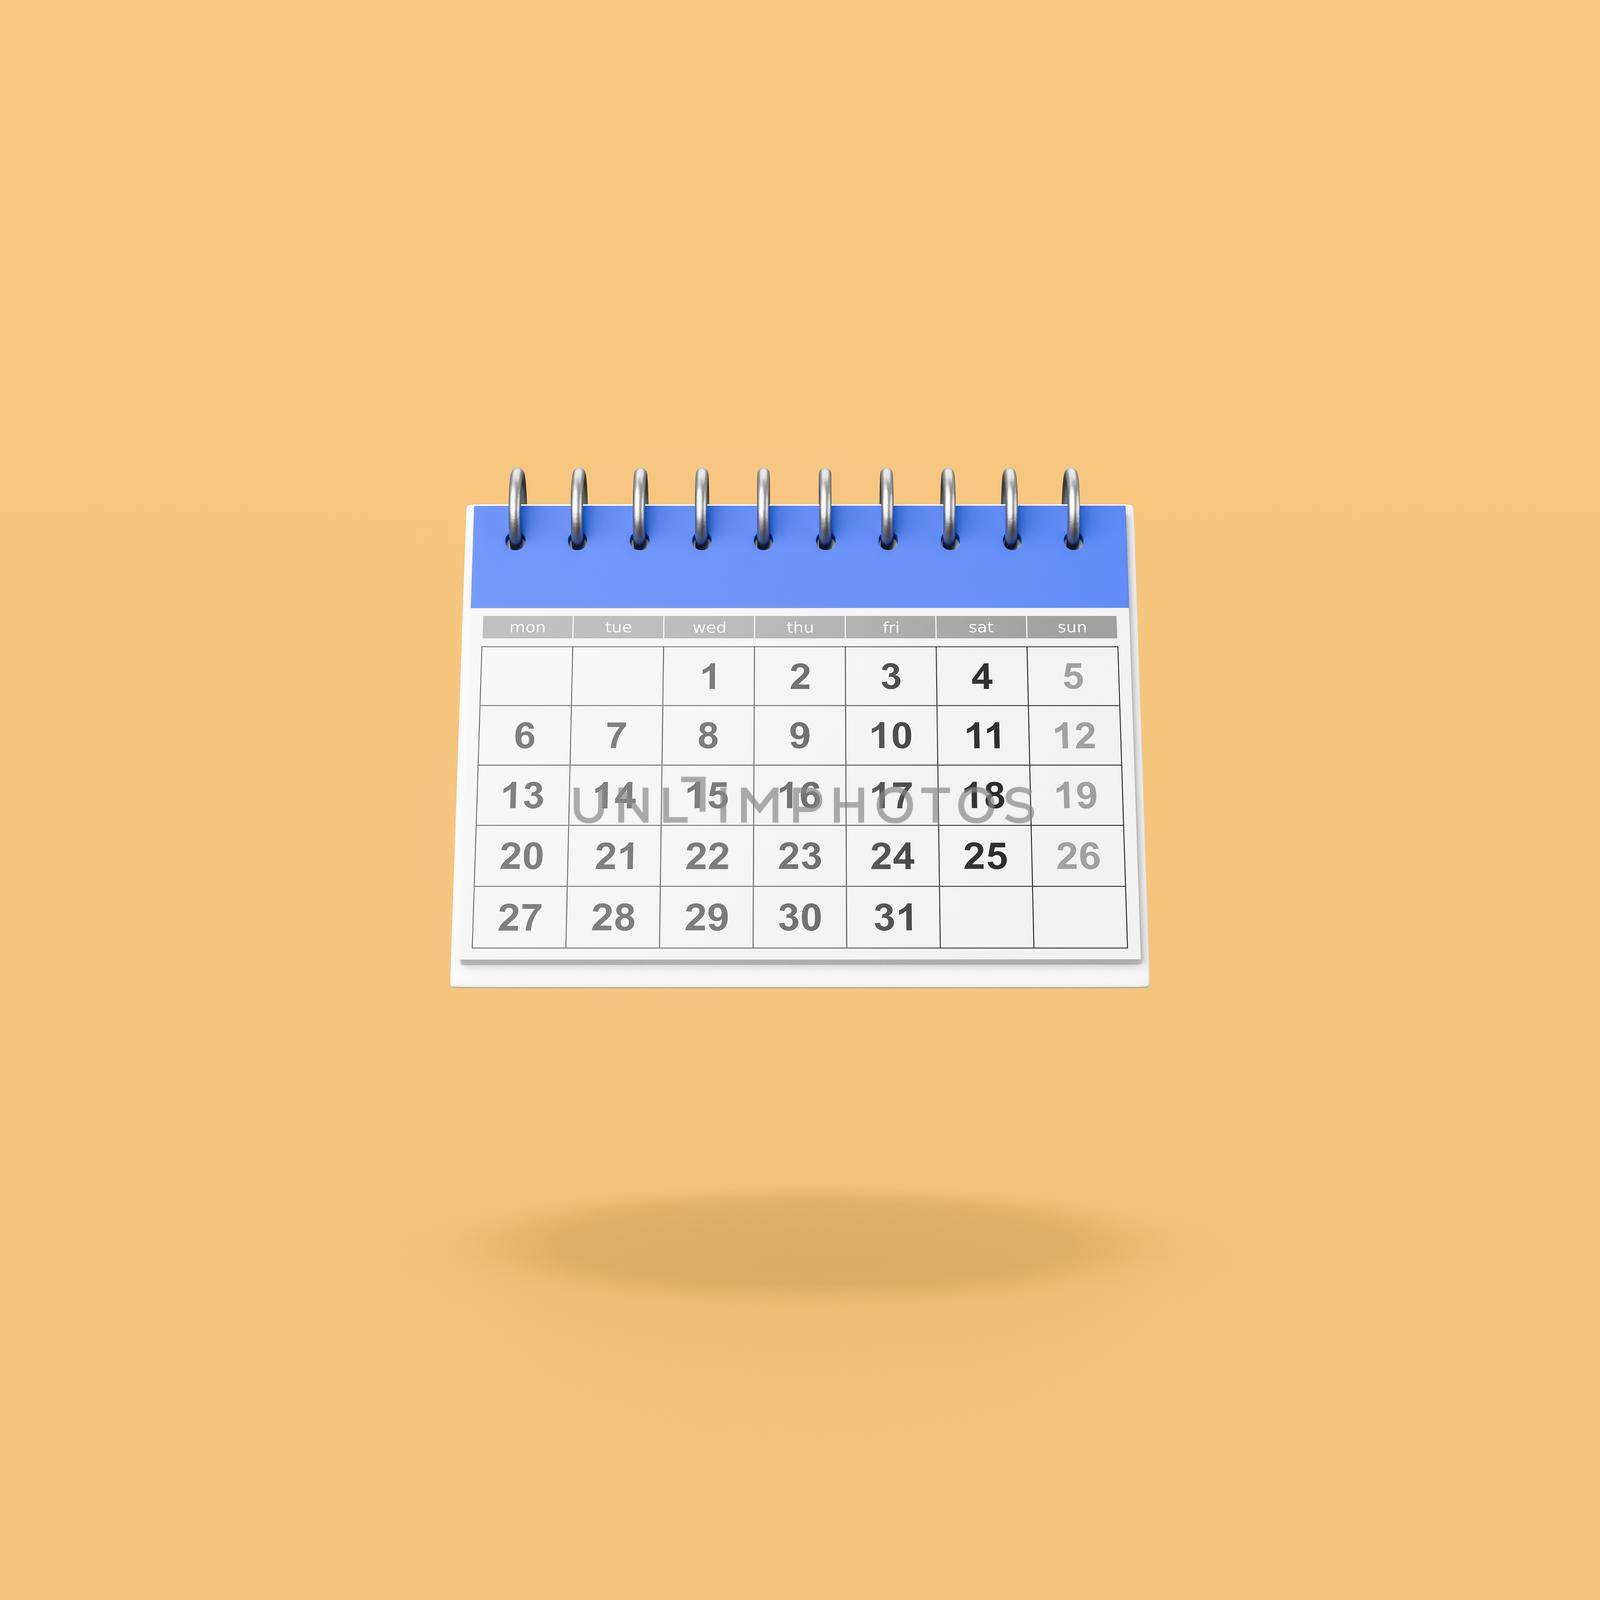 Blue and White Desk Calendar Isolated on Flat Orange Background with Shadow 3D Illustration